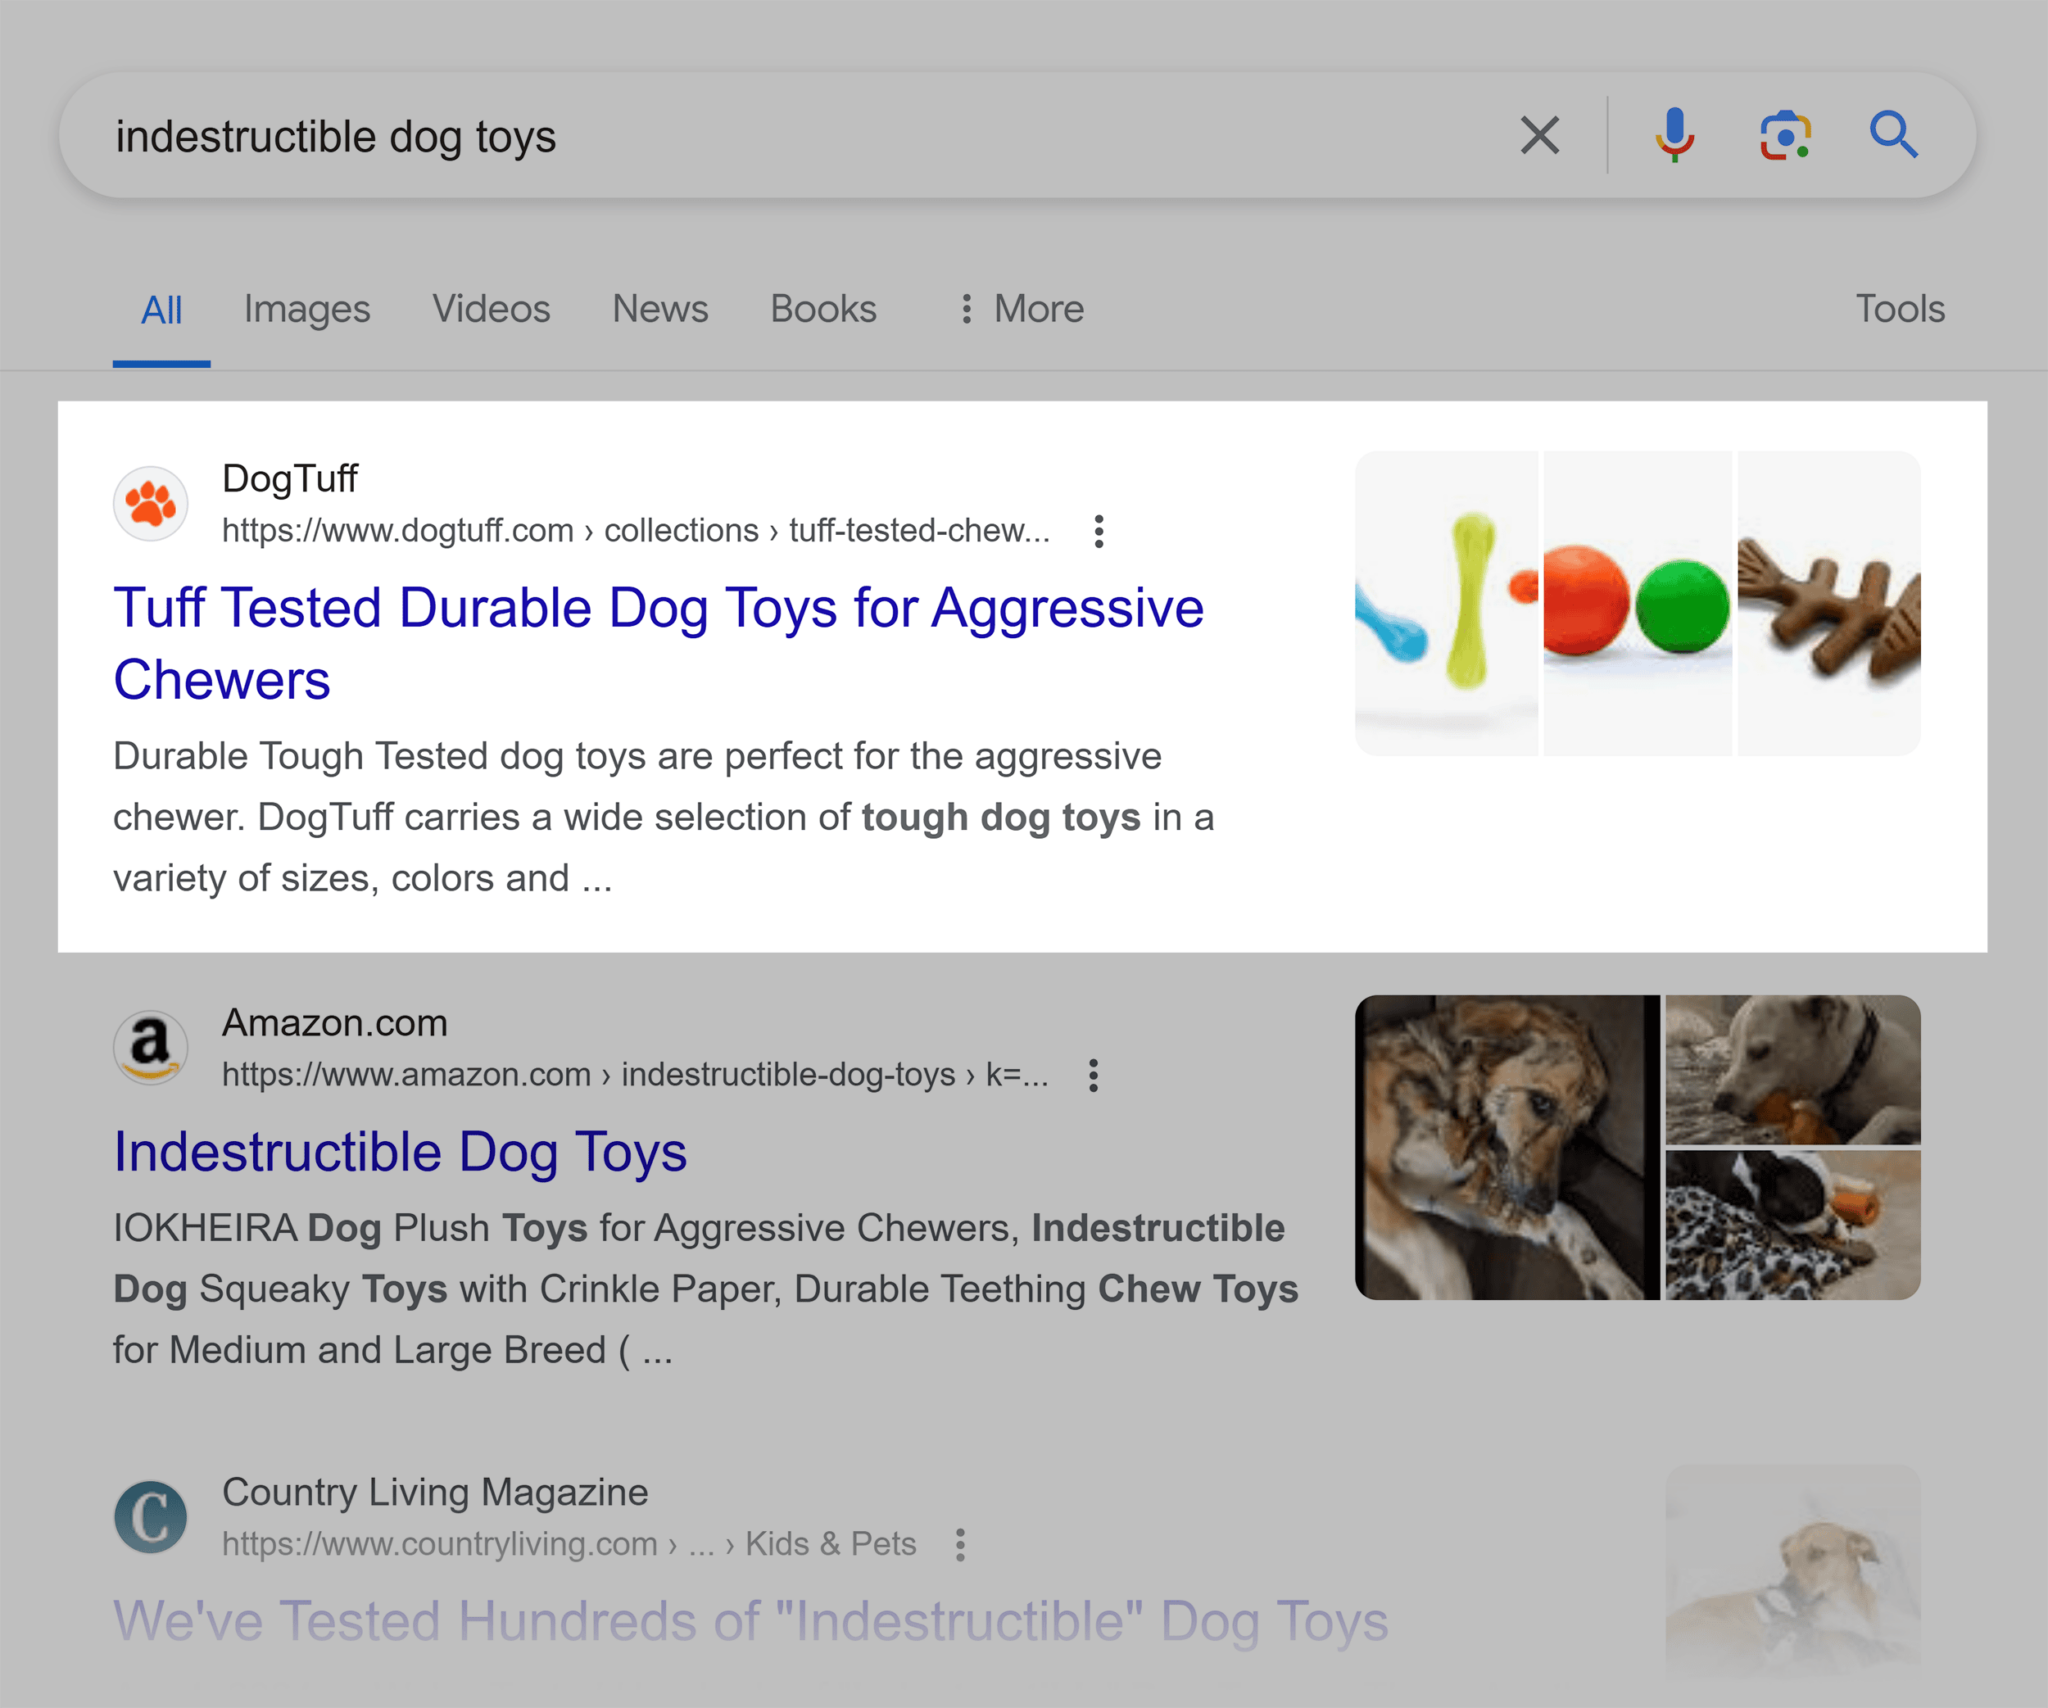 google-serp-indestructible-dog-toys Ecommerce Marketing: 11 Strategies to Drive Traffic and Sales